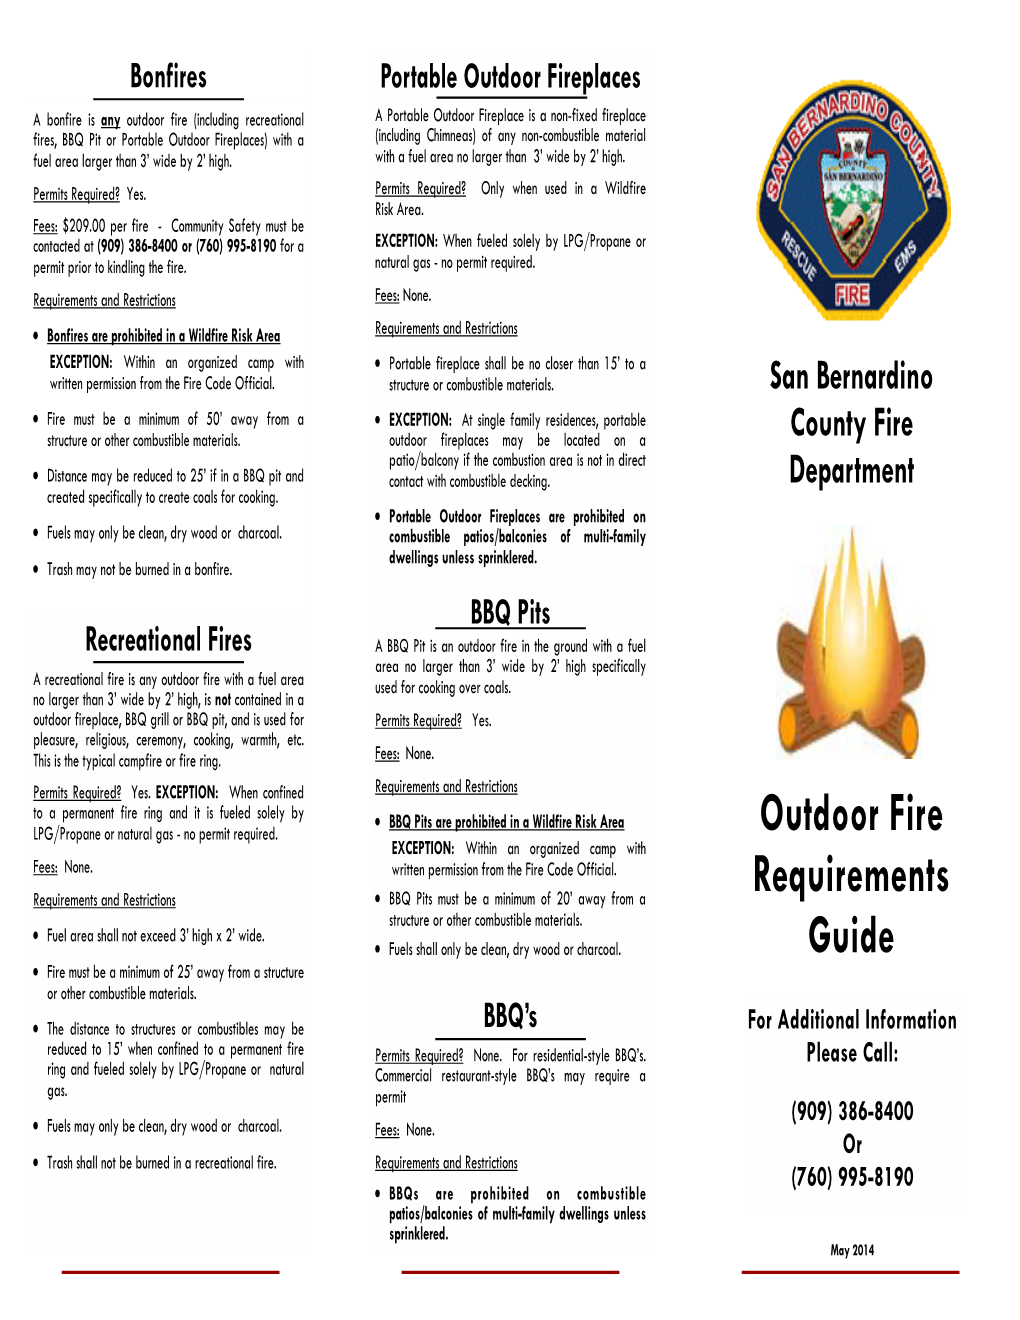 Outdoor Fire Requirements (January 2014 V1)